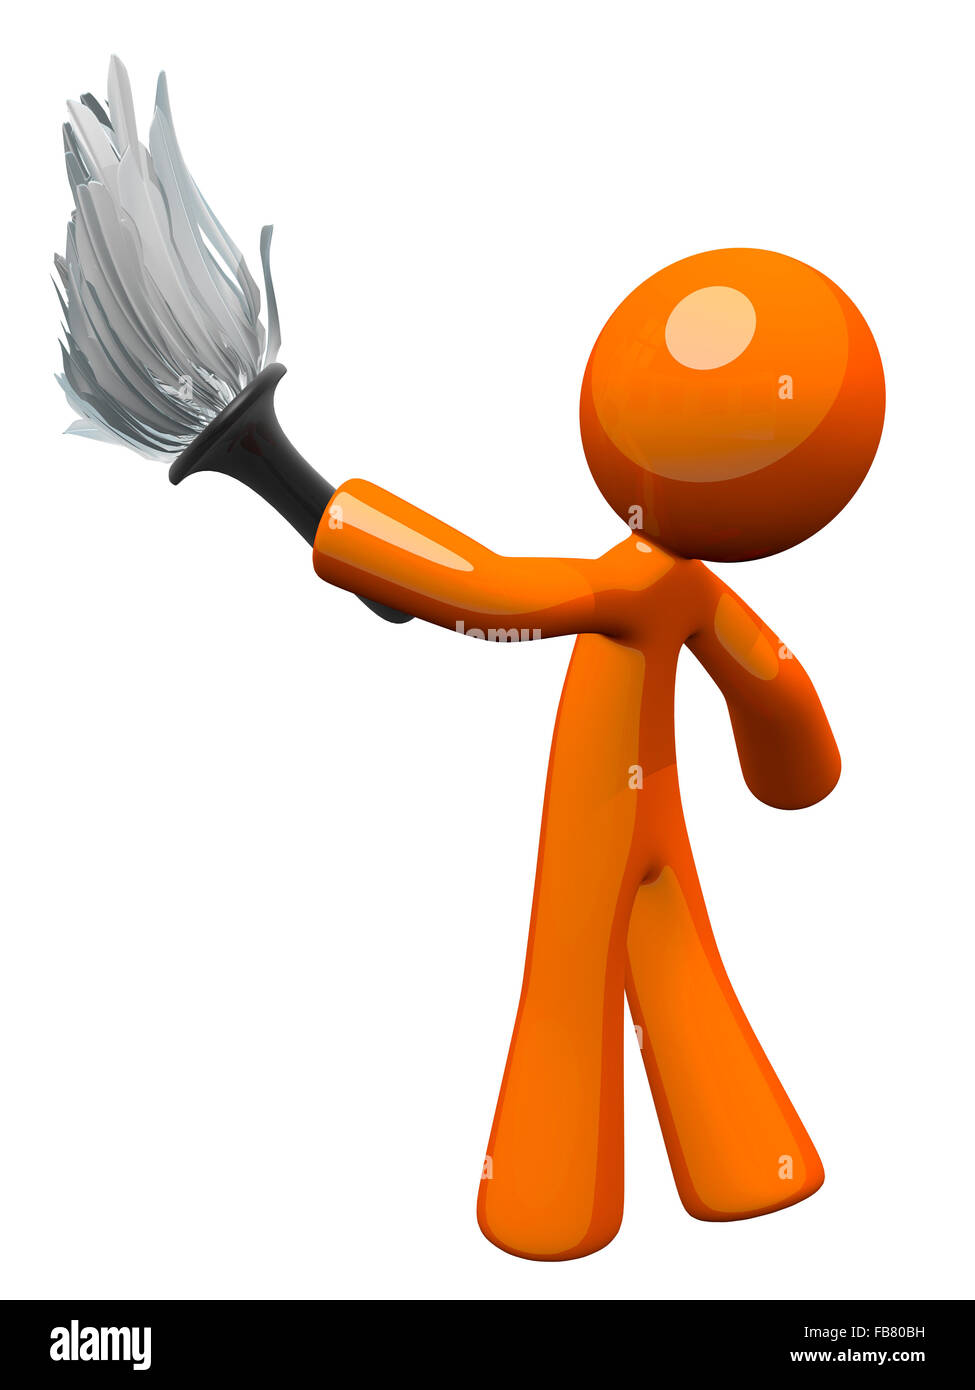 Orange man holding a feather duster, working to clean upkeep home. Stock Photo